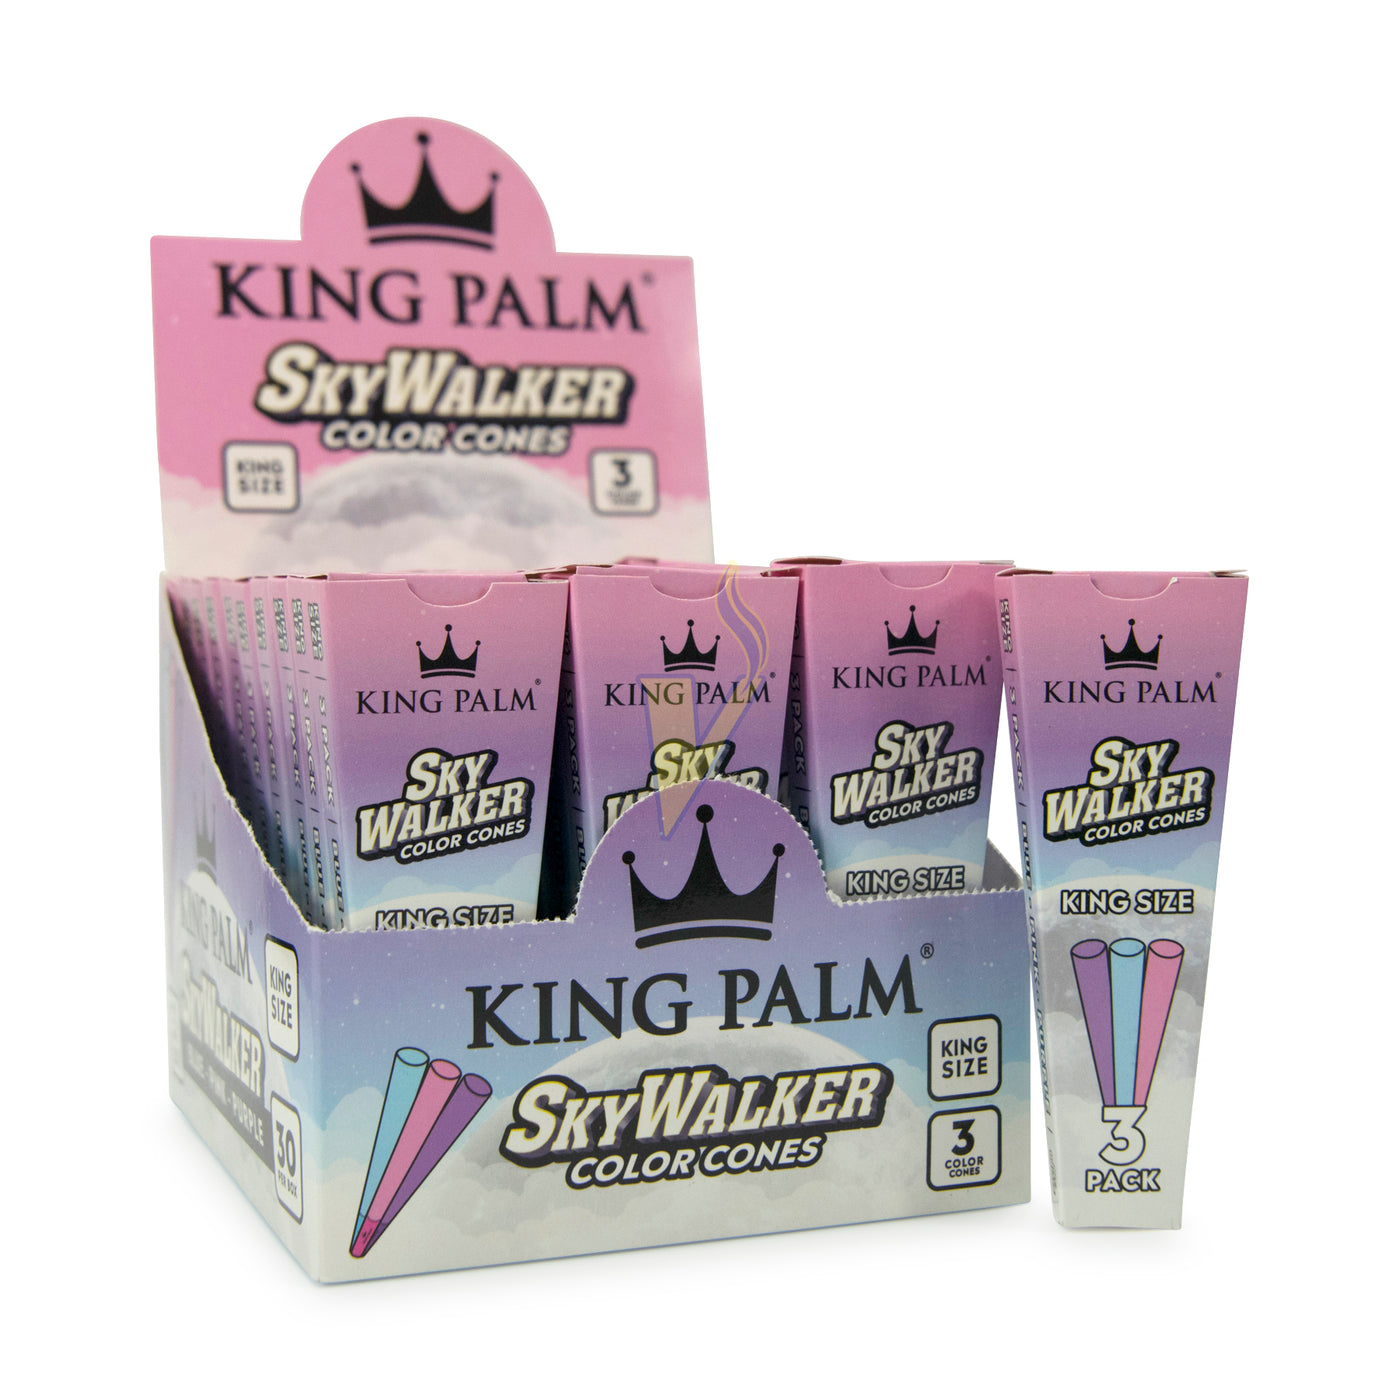 King Palm Color Cones King Size